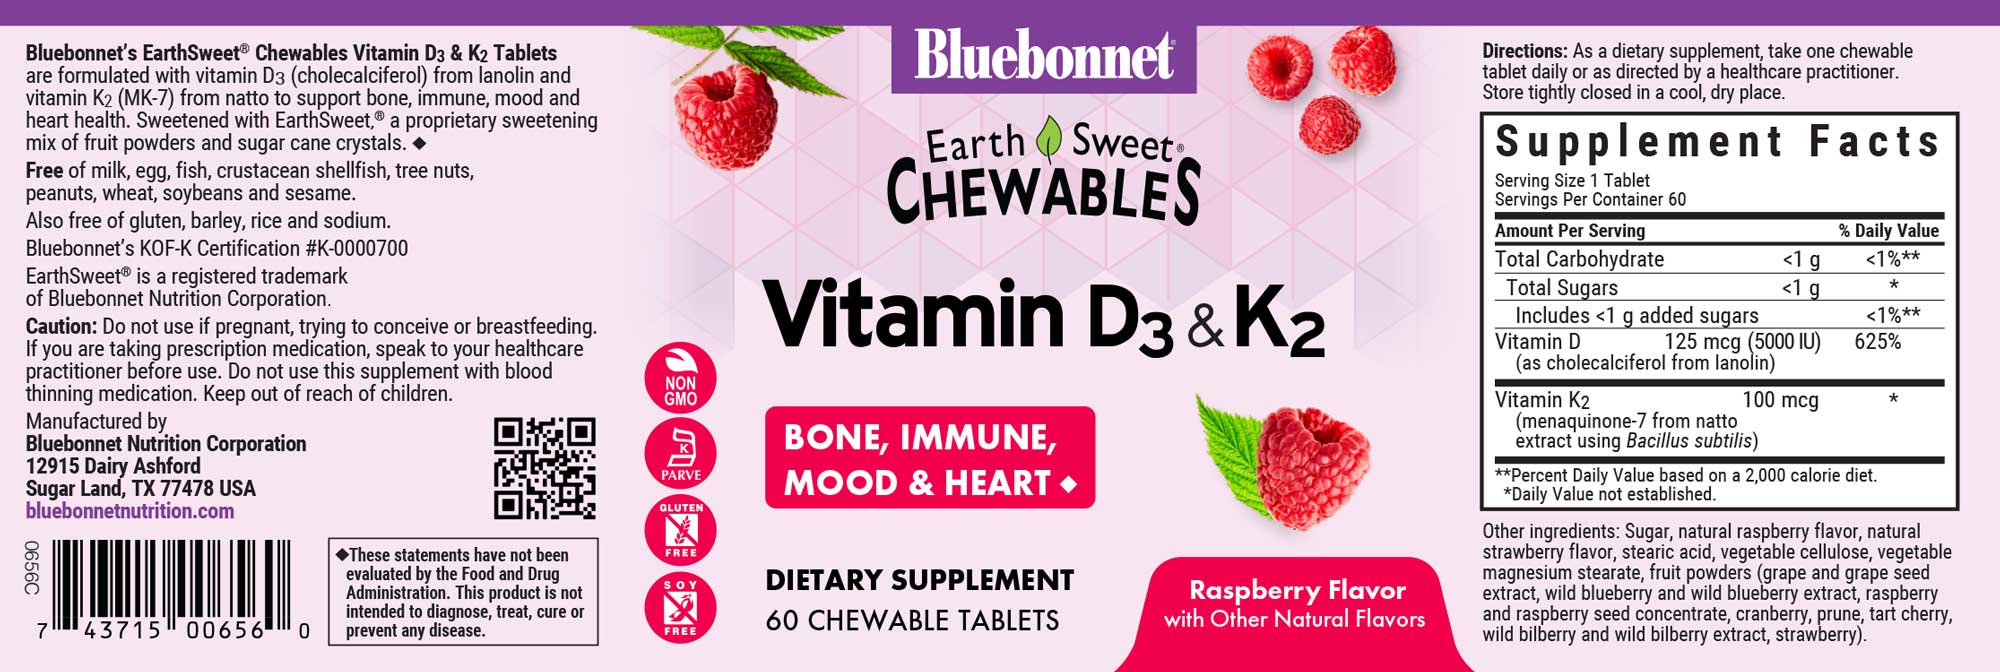 Earthsweet chewables Vitamin D3 K2 specially formulated with 125 mcg (5000 iu) vitamin d3 from lanolin and 100 mcg vitamin k2 from natto in a delicious raspberry flavor and sweetened with EarthSweet®, a proprietary sweetening mix of fruit powders and cane sugar crystals to help suppor immune function, mood, and heart health #size_60 count